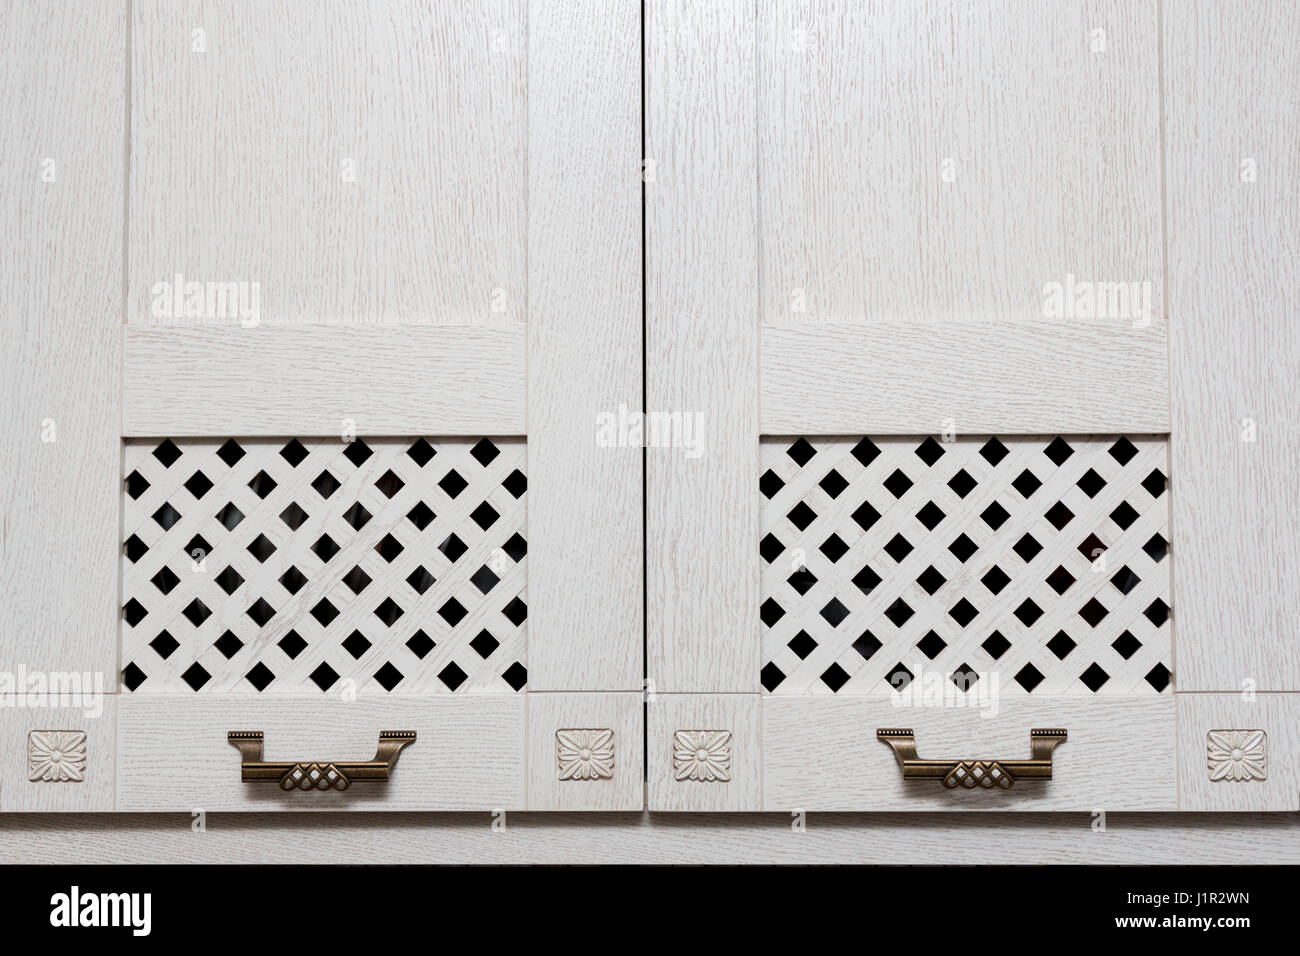 cabinet door with a metal handle in ancient style Stock Photo